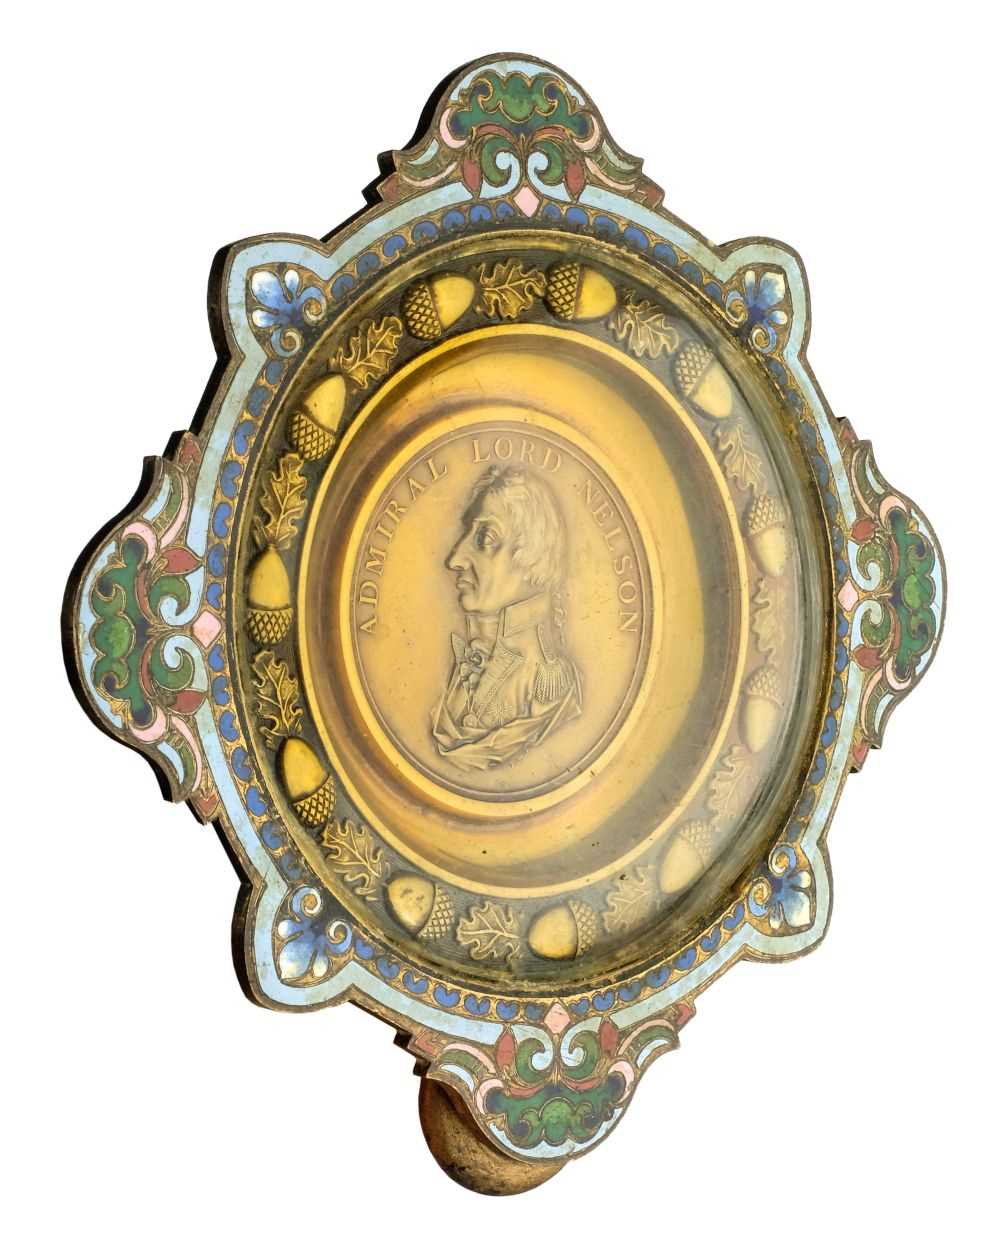 Lot 72 - Nelson (Vice Admiral Horatio). A late 19th century commemorative circular brass plaque